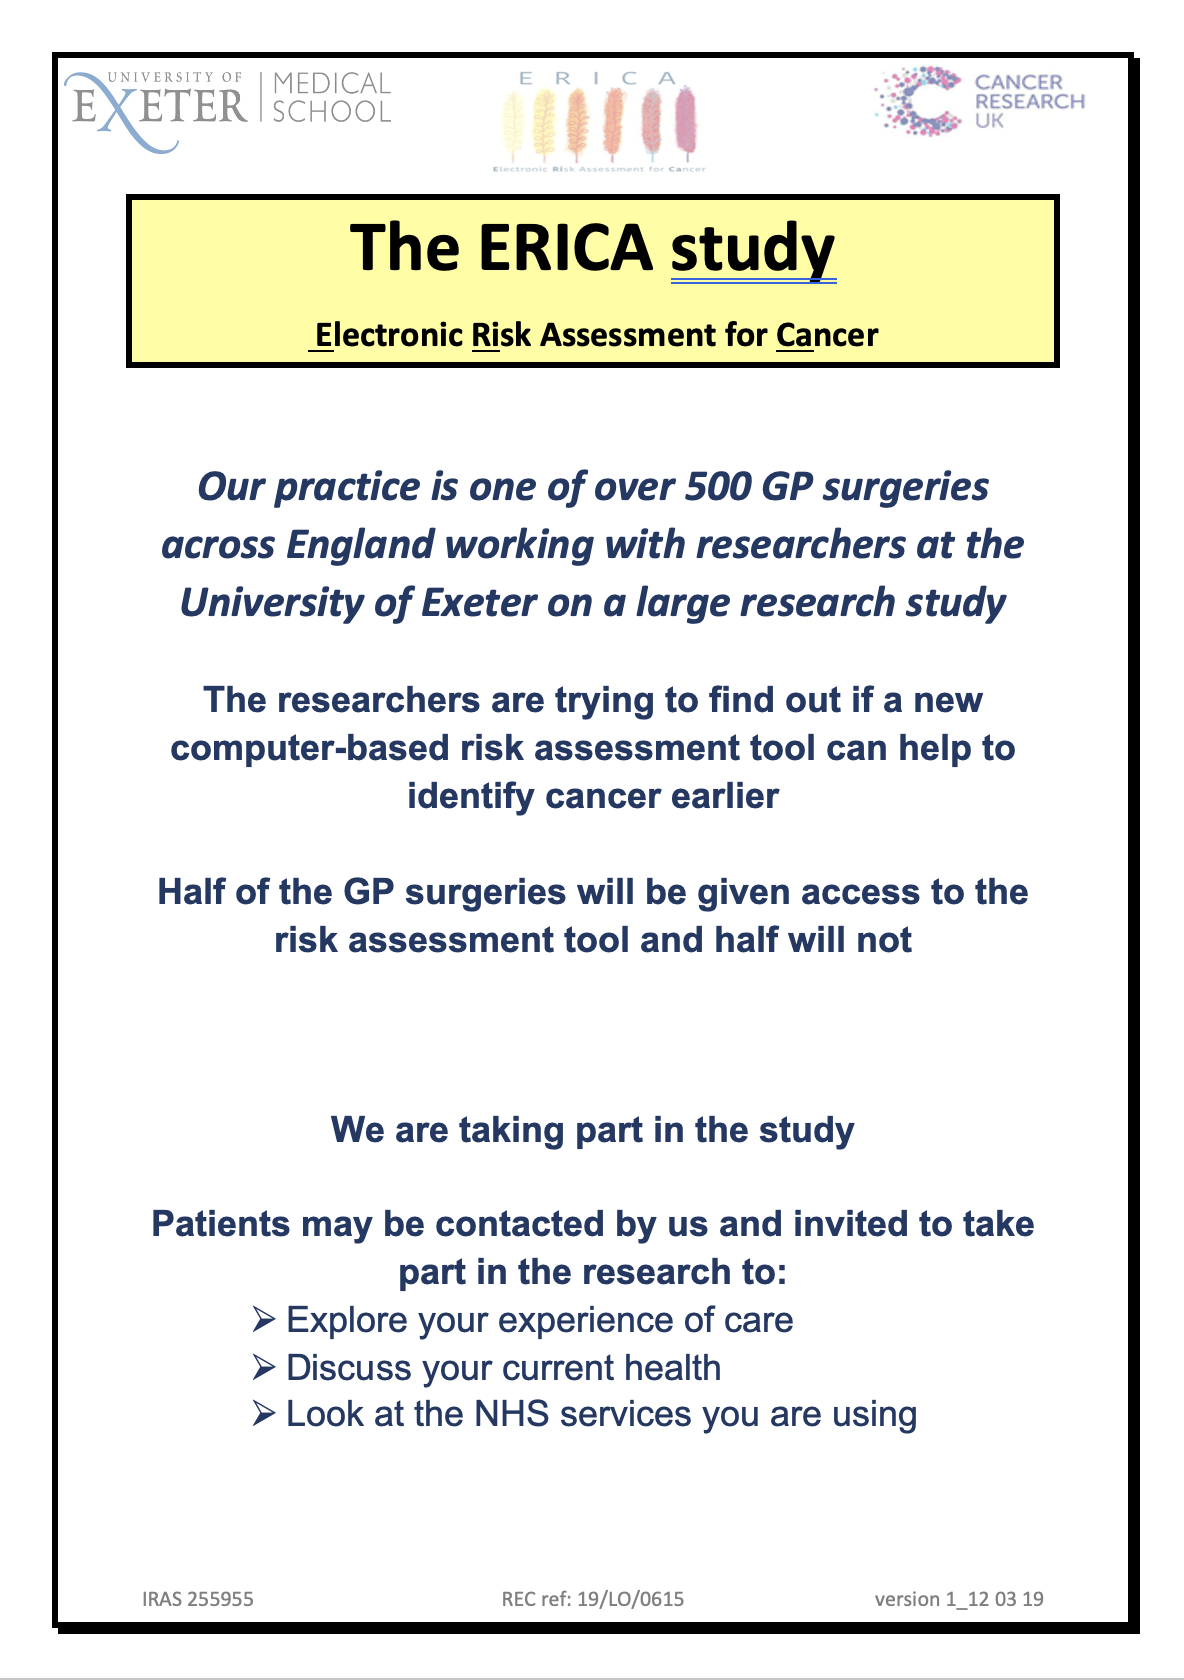 The ERICA study – Electronic Risk Assessment for Cancer